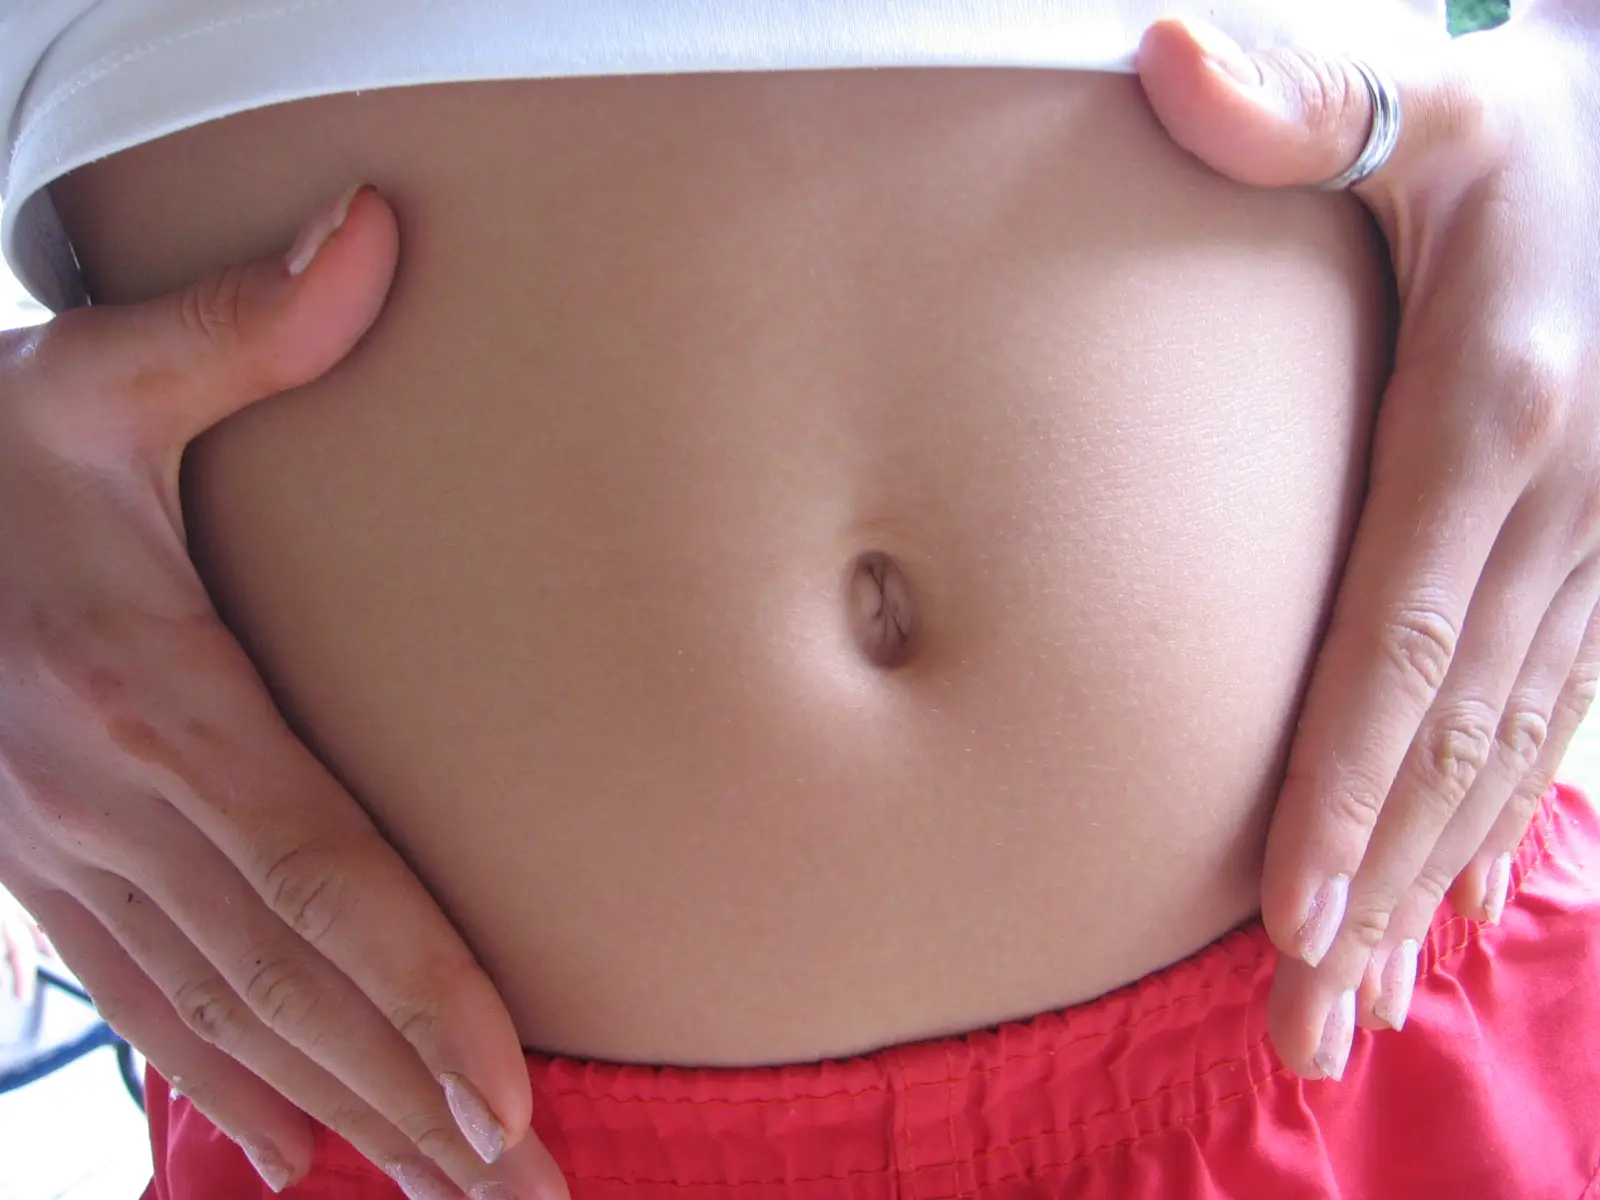 Other Spiritual Causes Of A Bloated Stomach